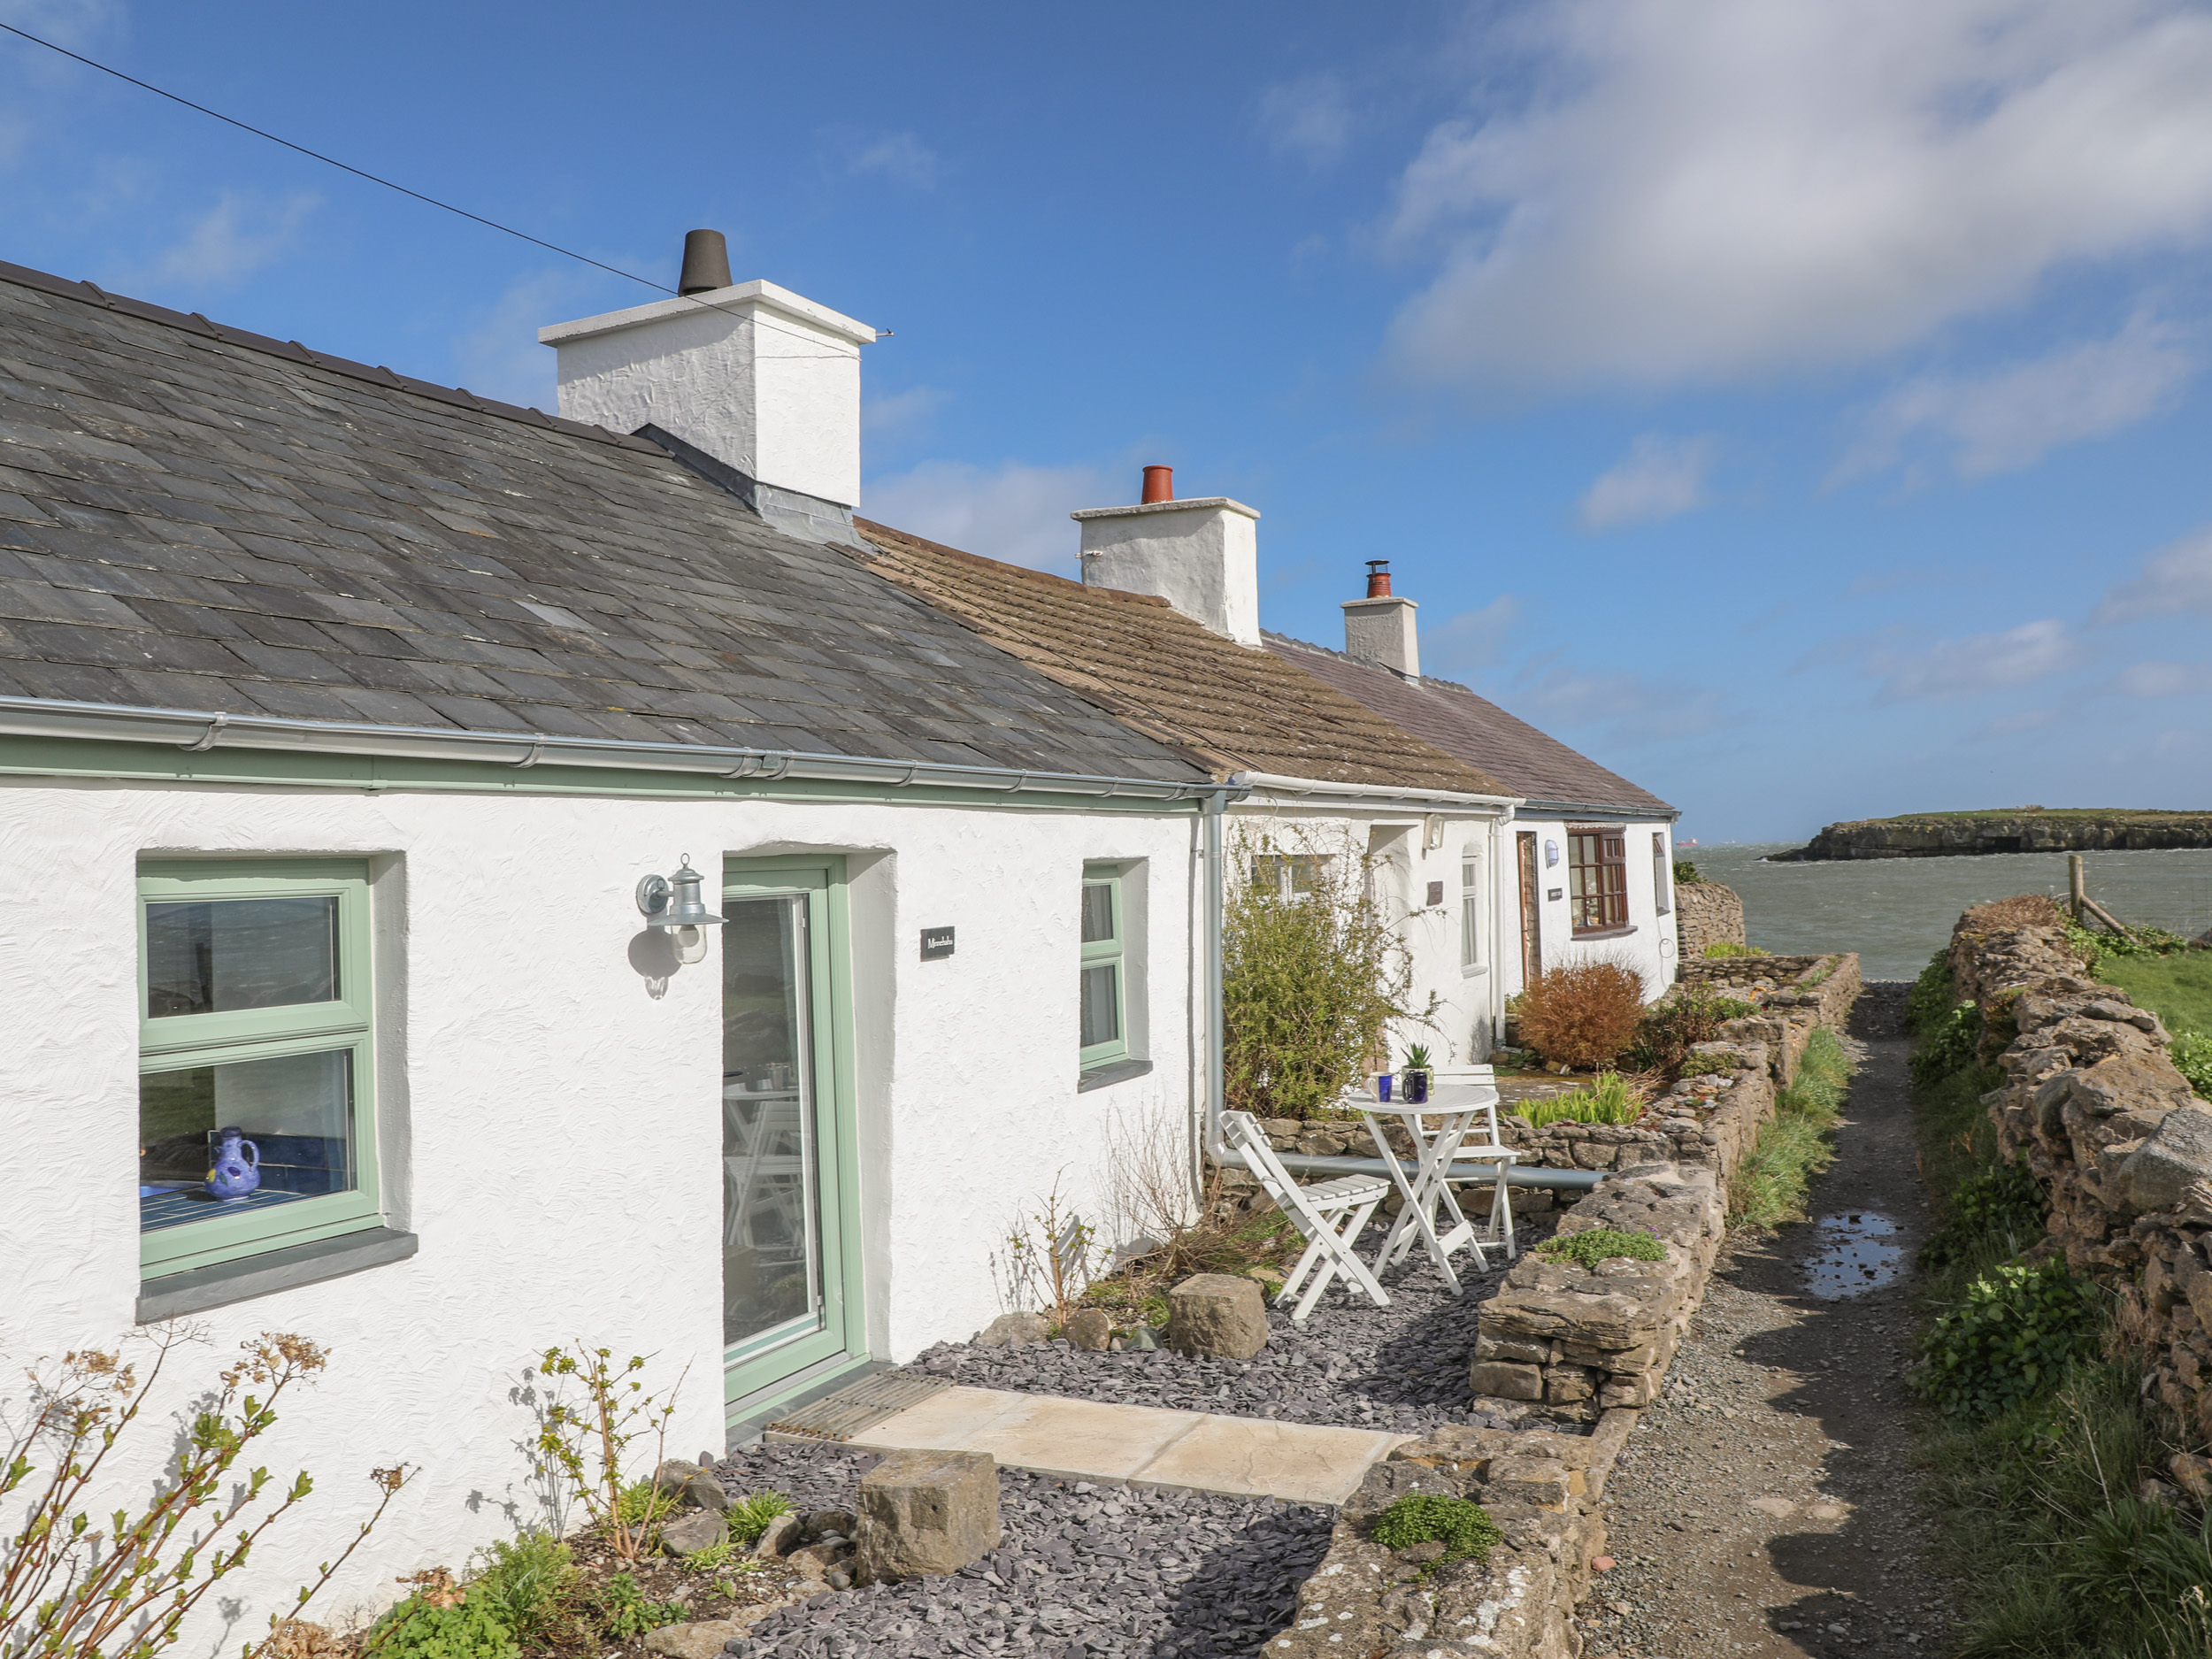 Minnehaha Dog Friendly Cottage in Moelfre Anglesey Wales